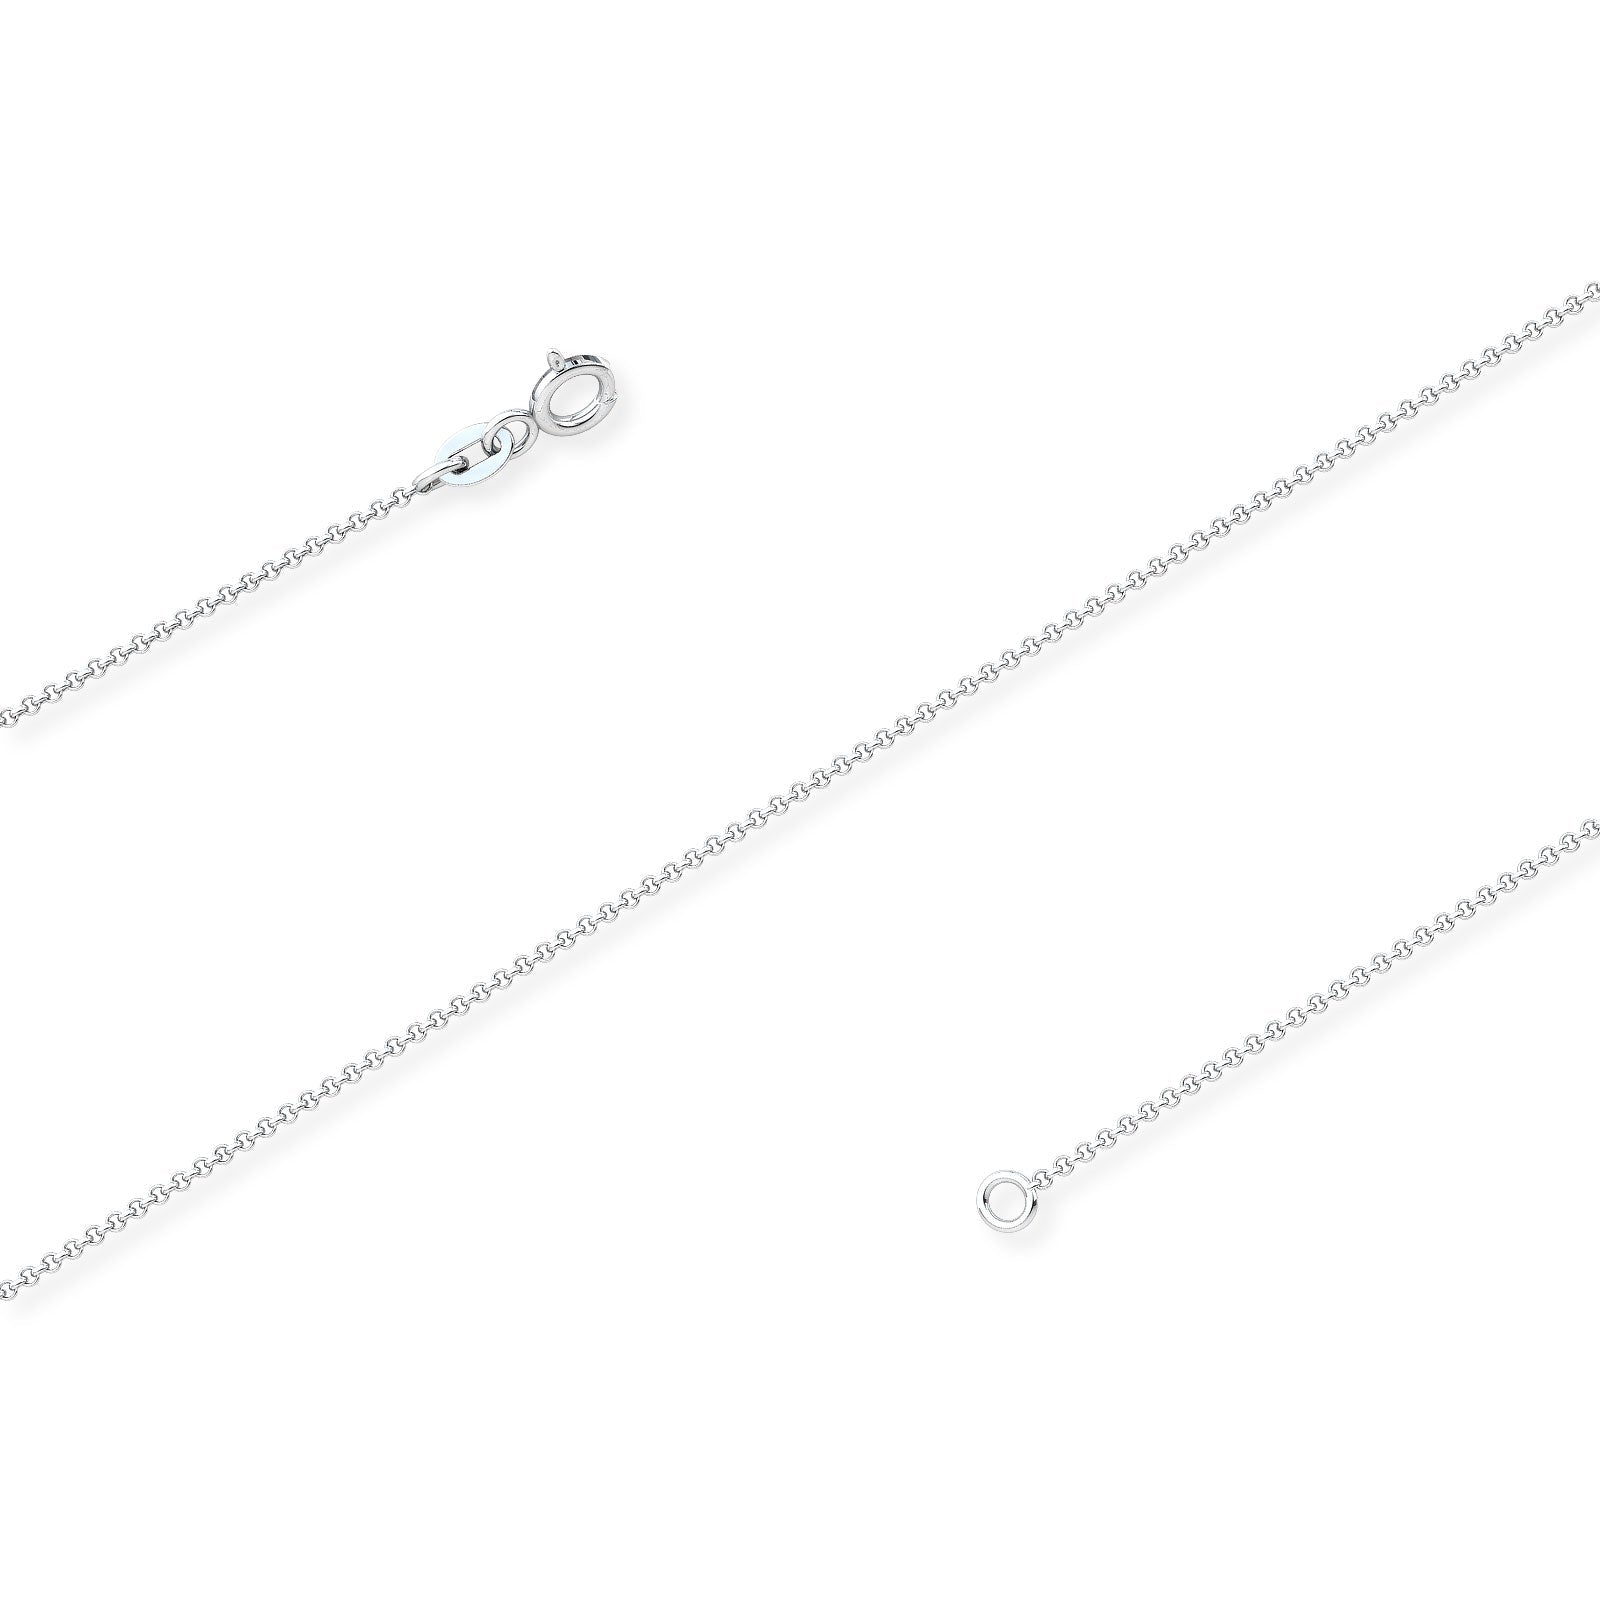 Rolo (1.5mm) Sterling Silver Chain, 18", 20", 24", 30"